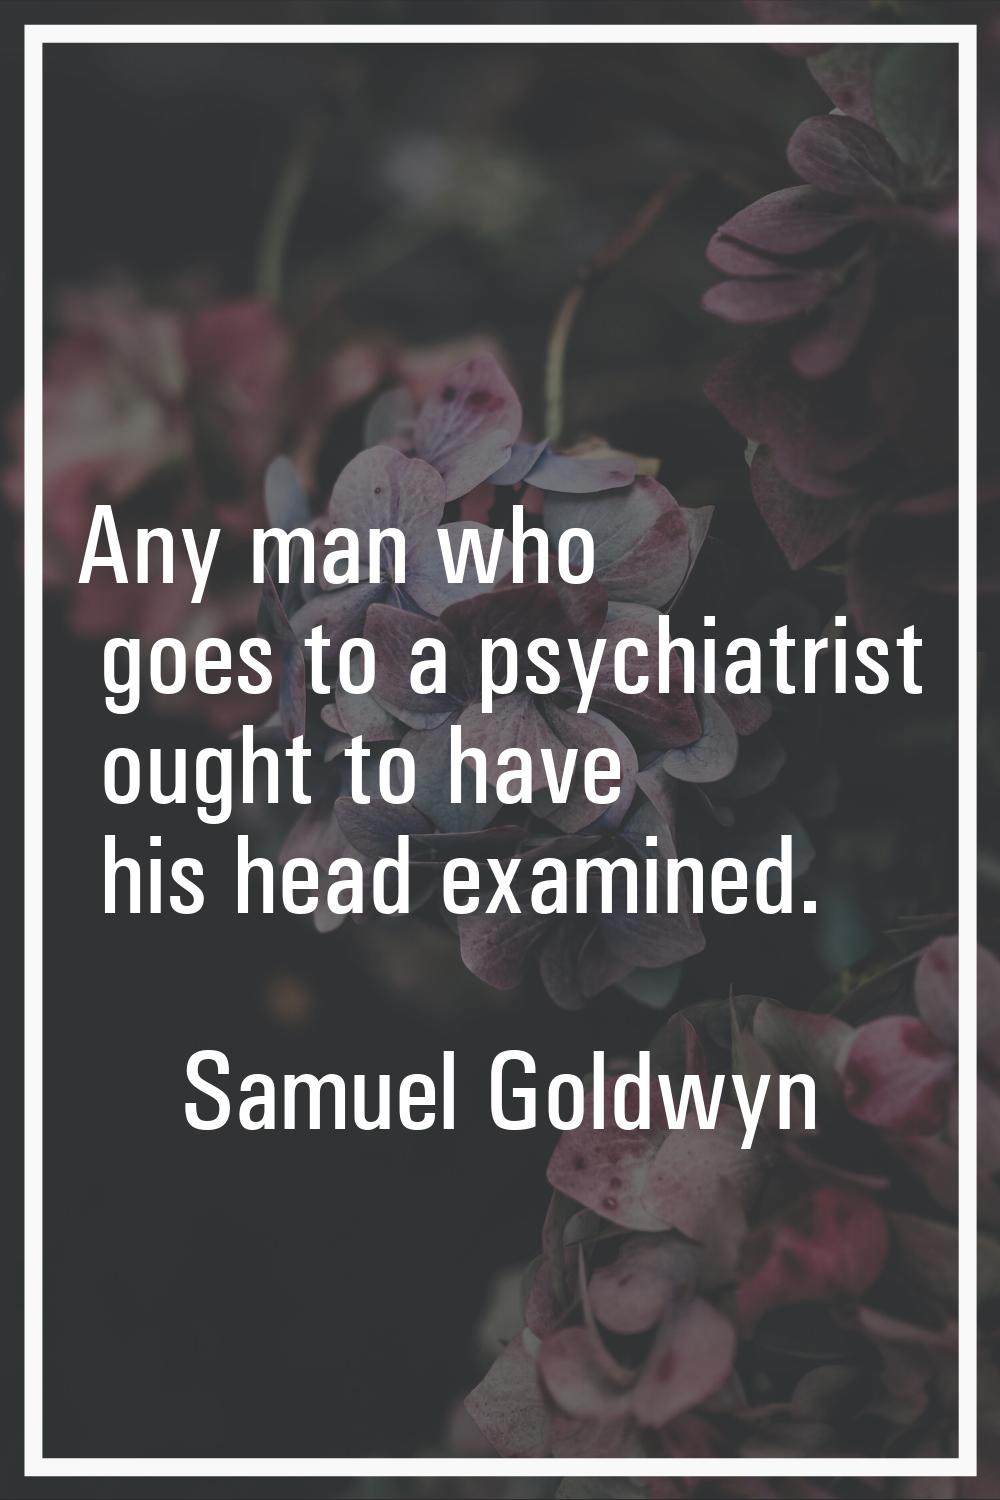 Any man who goes to a psychiatrist ought to have his head examined.